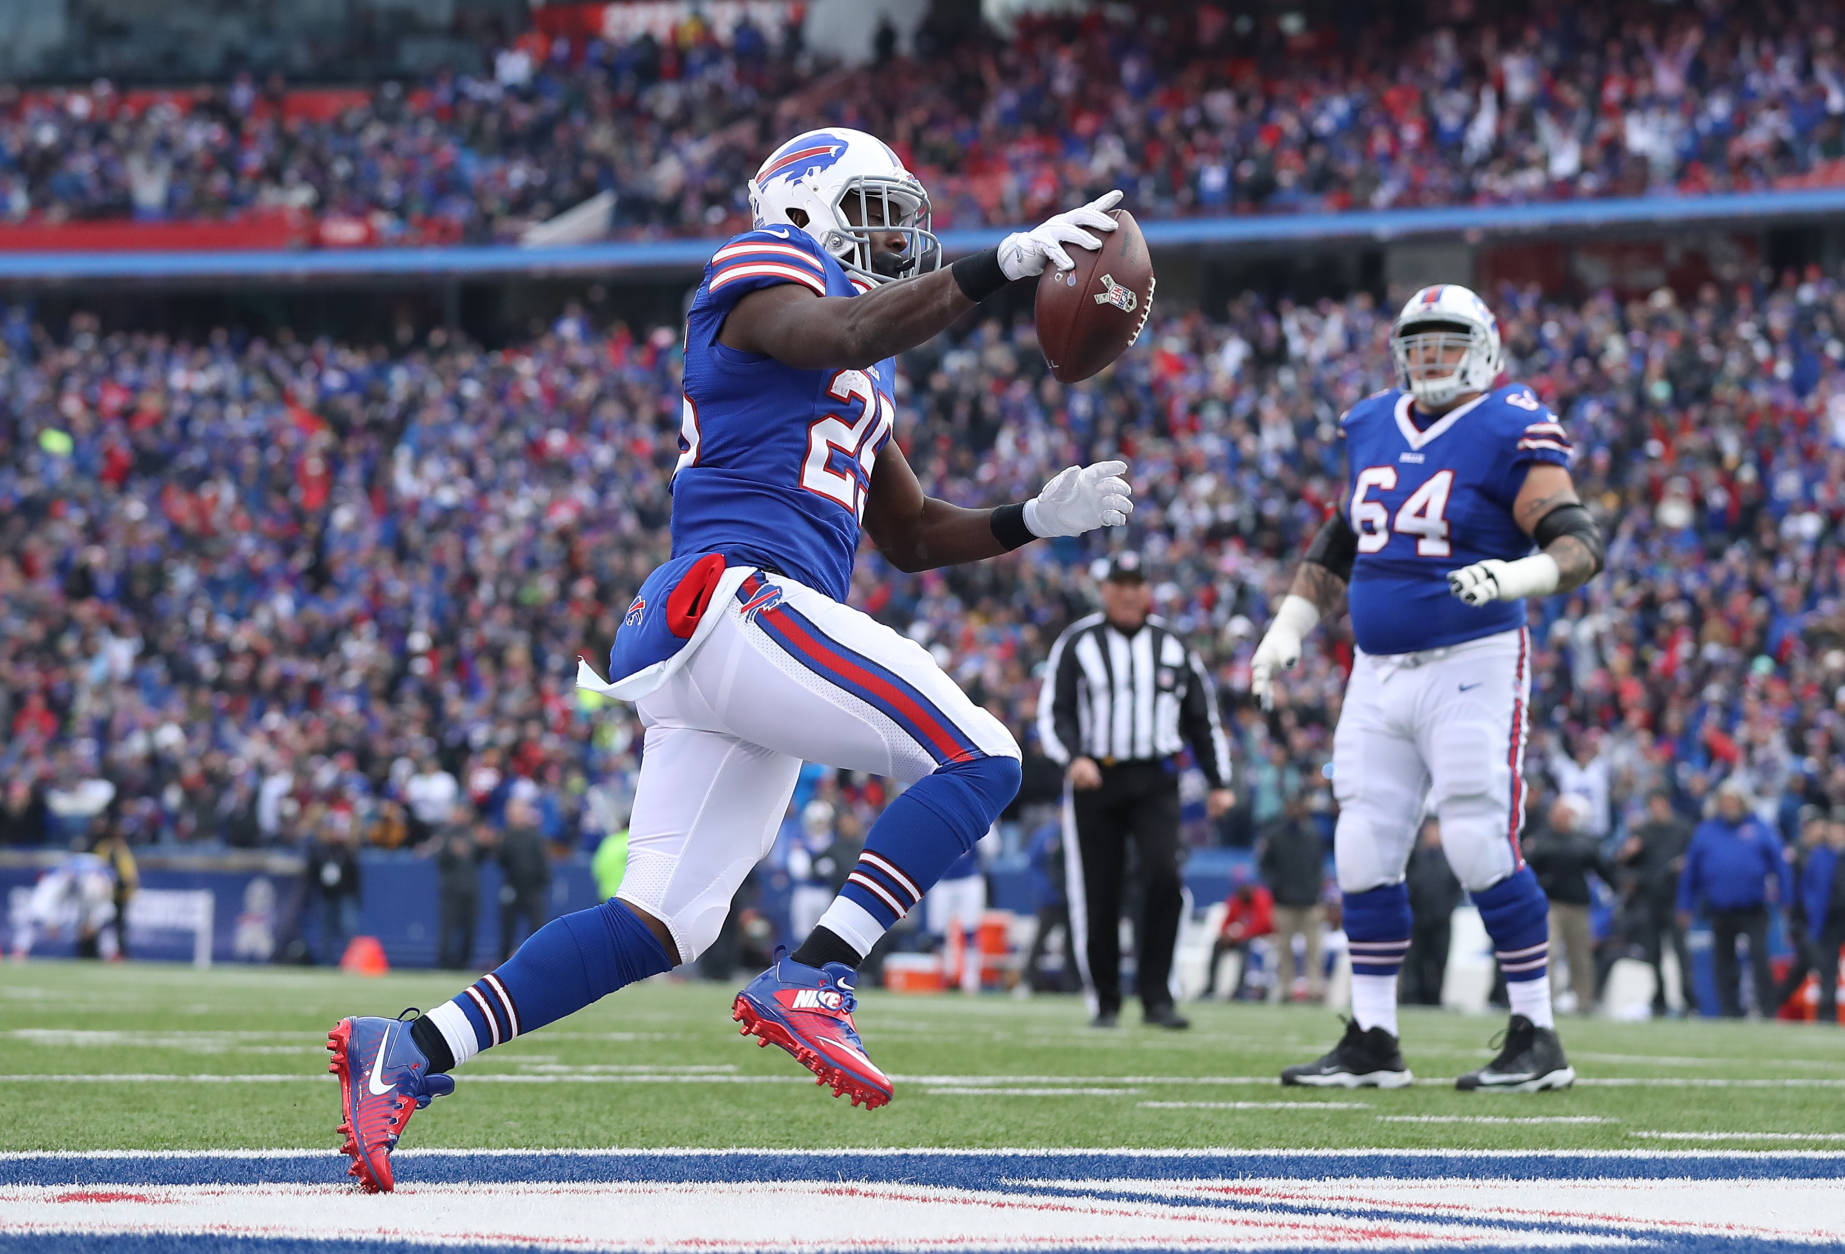 ORCHARD PARK, NY - NOVEMBER 27: LeSean McCoy #25 of the Buffalo Bills celebrates as he scores a touchdown in the second quarter during NFL game action against the Jacksonville Jaguars at New Era Field on November 27, 2016 in Orchard Park, New York. (Photo by Tom Szczerbowski/Getty Images)